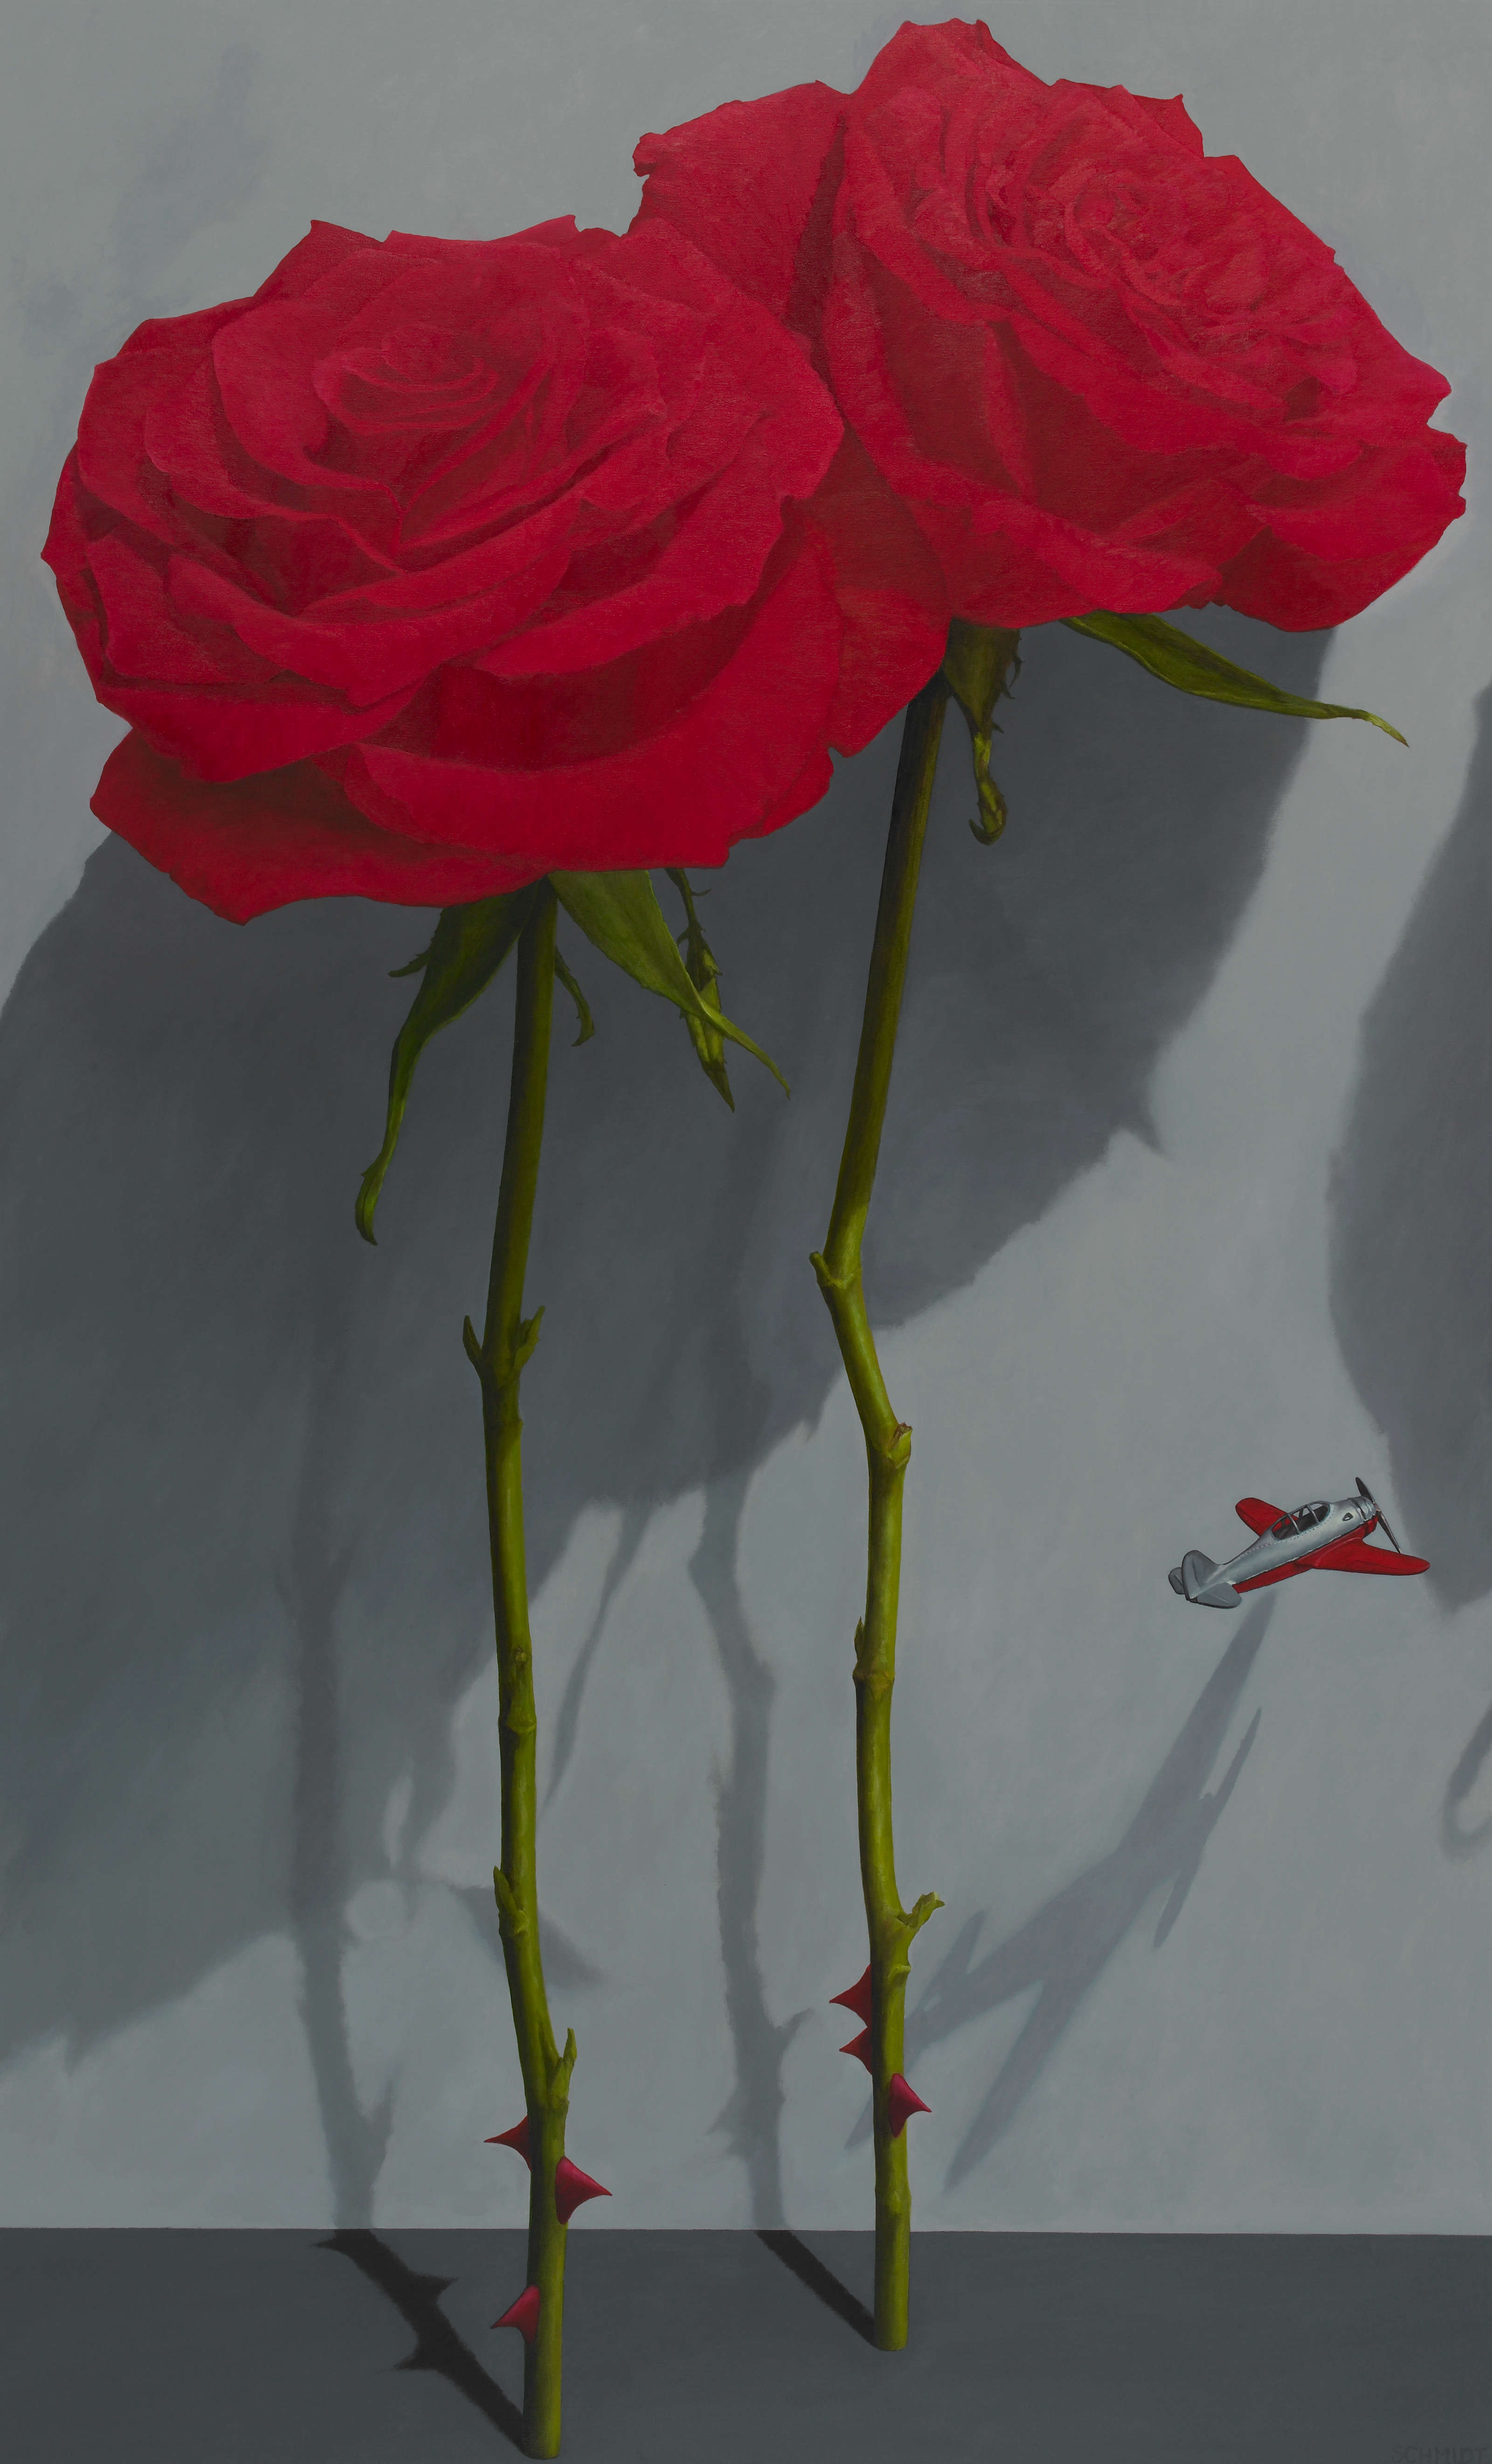 2 giant red roses, stems and thorns, dark gray background with shadows, 1 tiny red and silver airplane flying